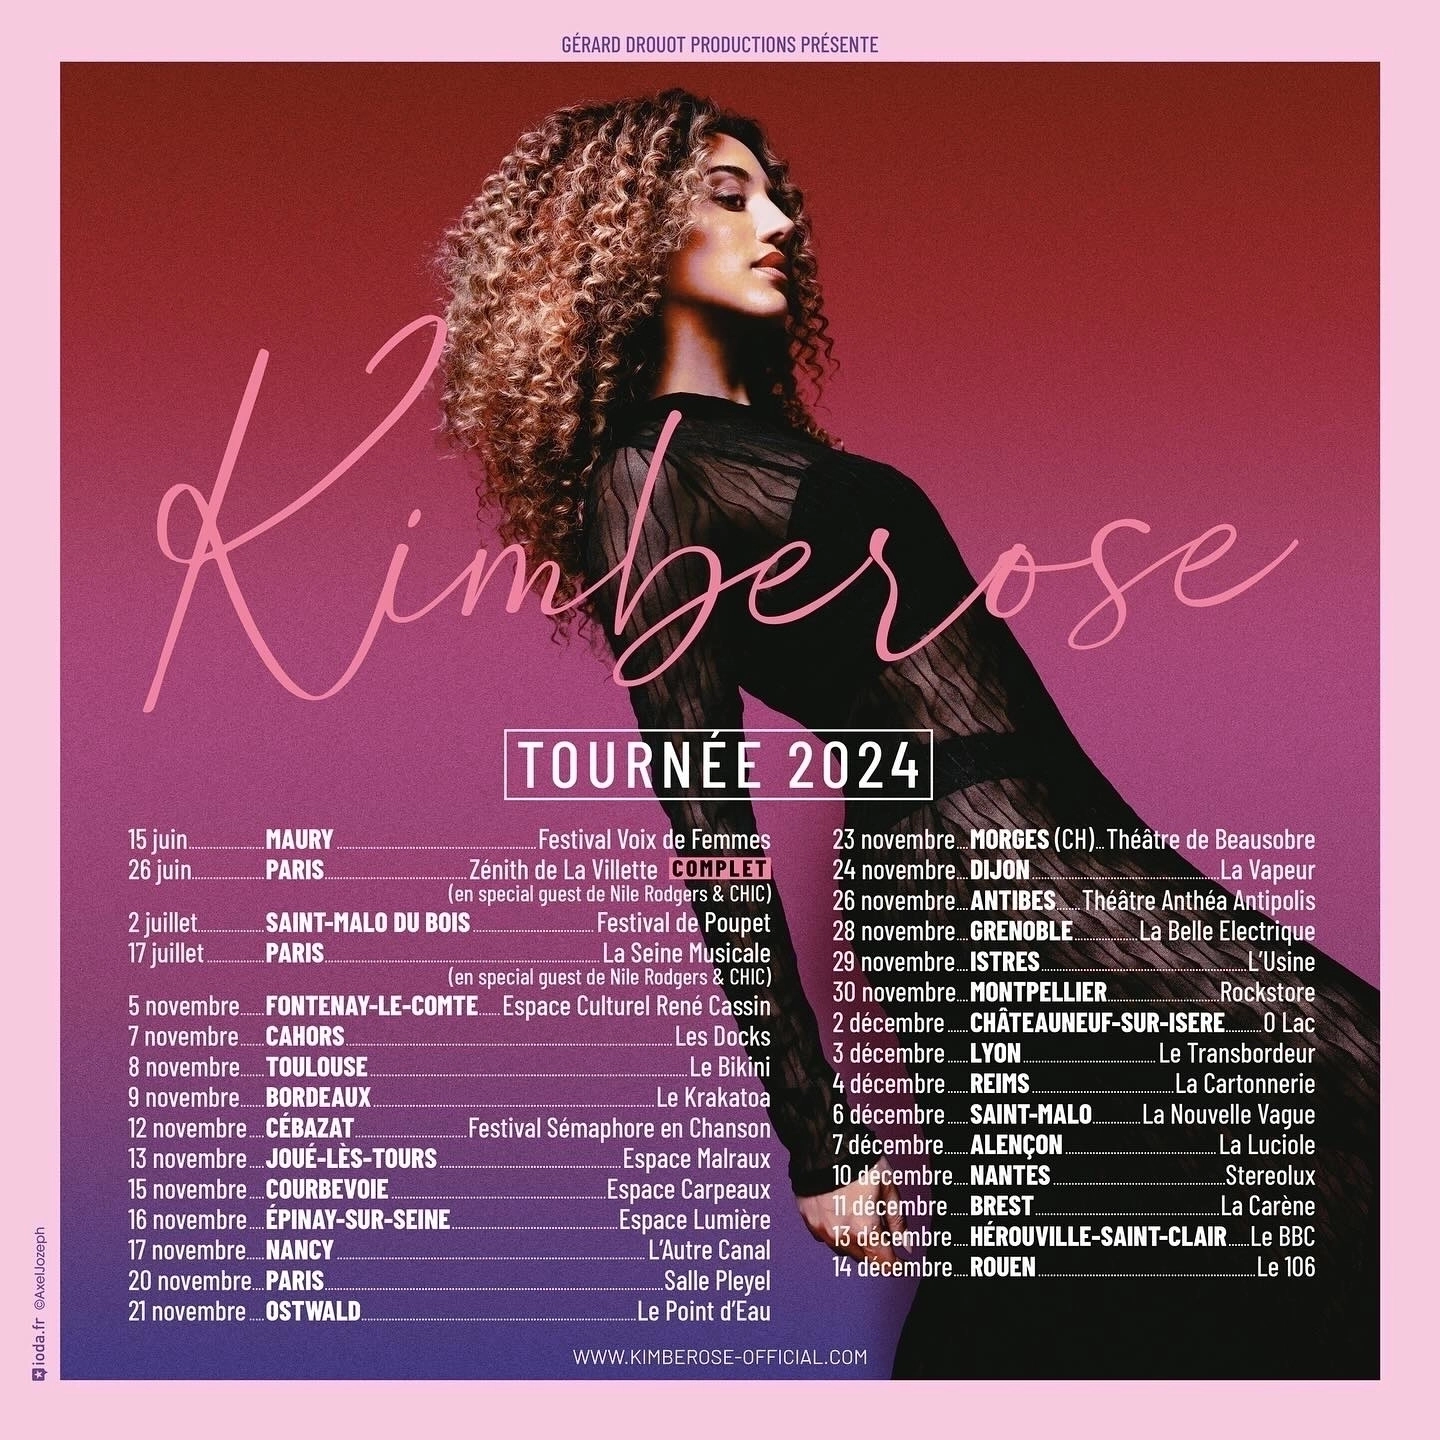 Kimberose in der Le 106 Tickets